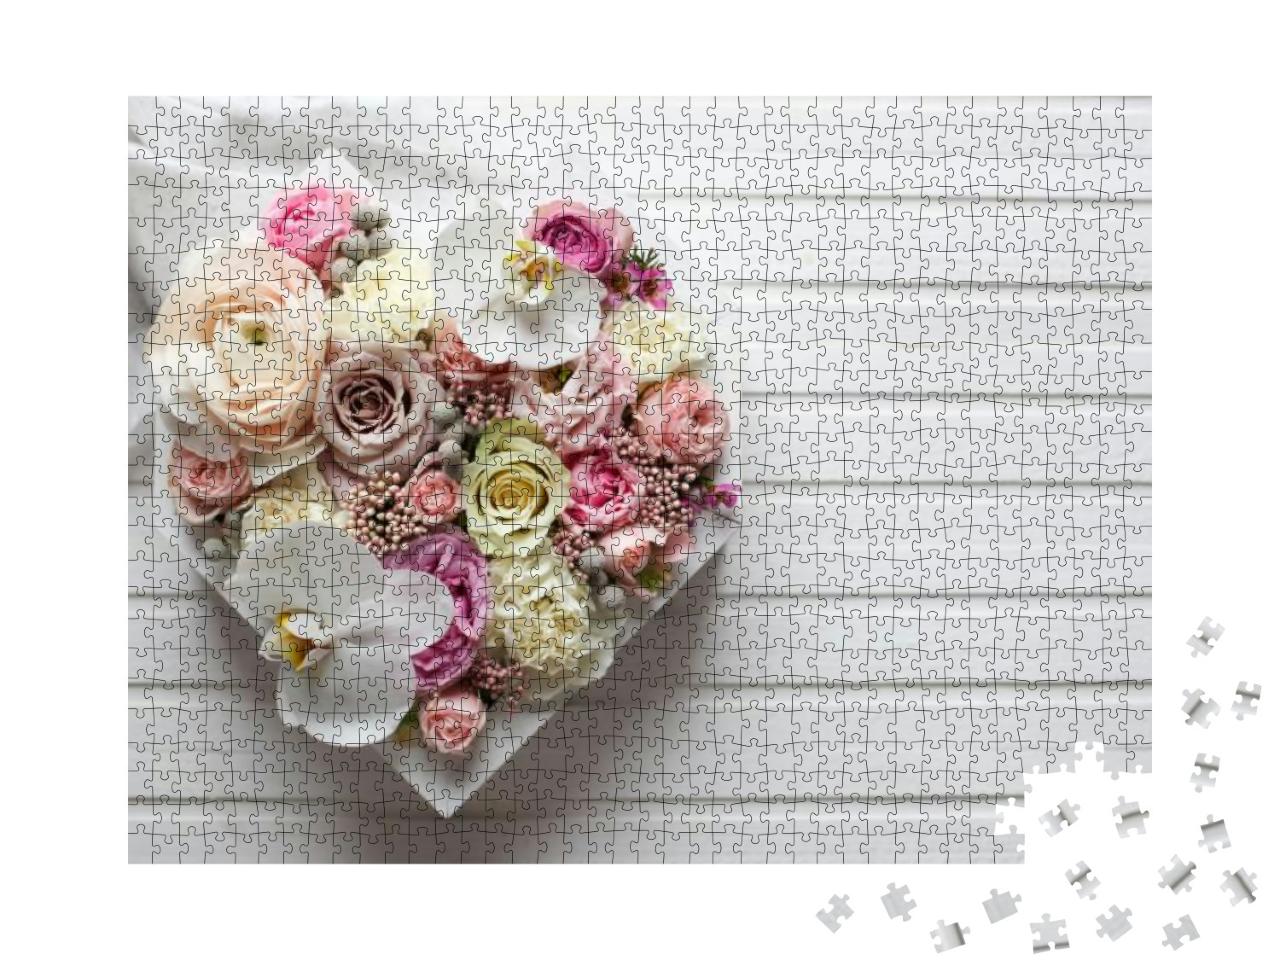 Big Flowers Heart in Pastel Colors & White Wood Backgroun... Jigsaw Puzzle with 1000 pieces